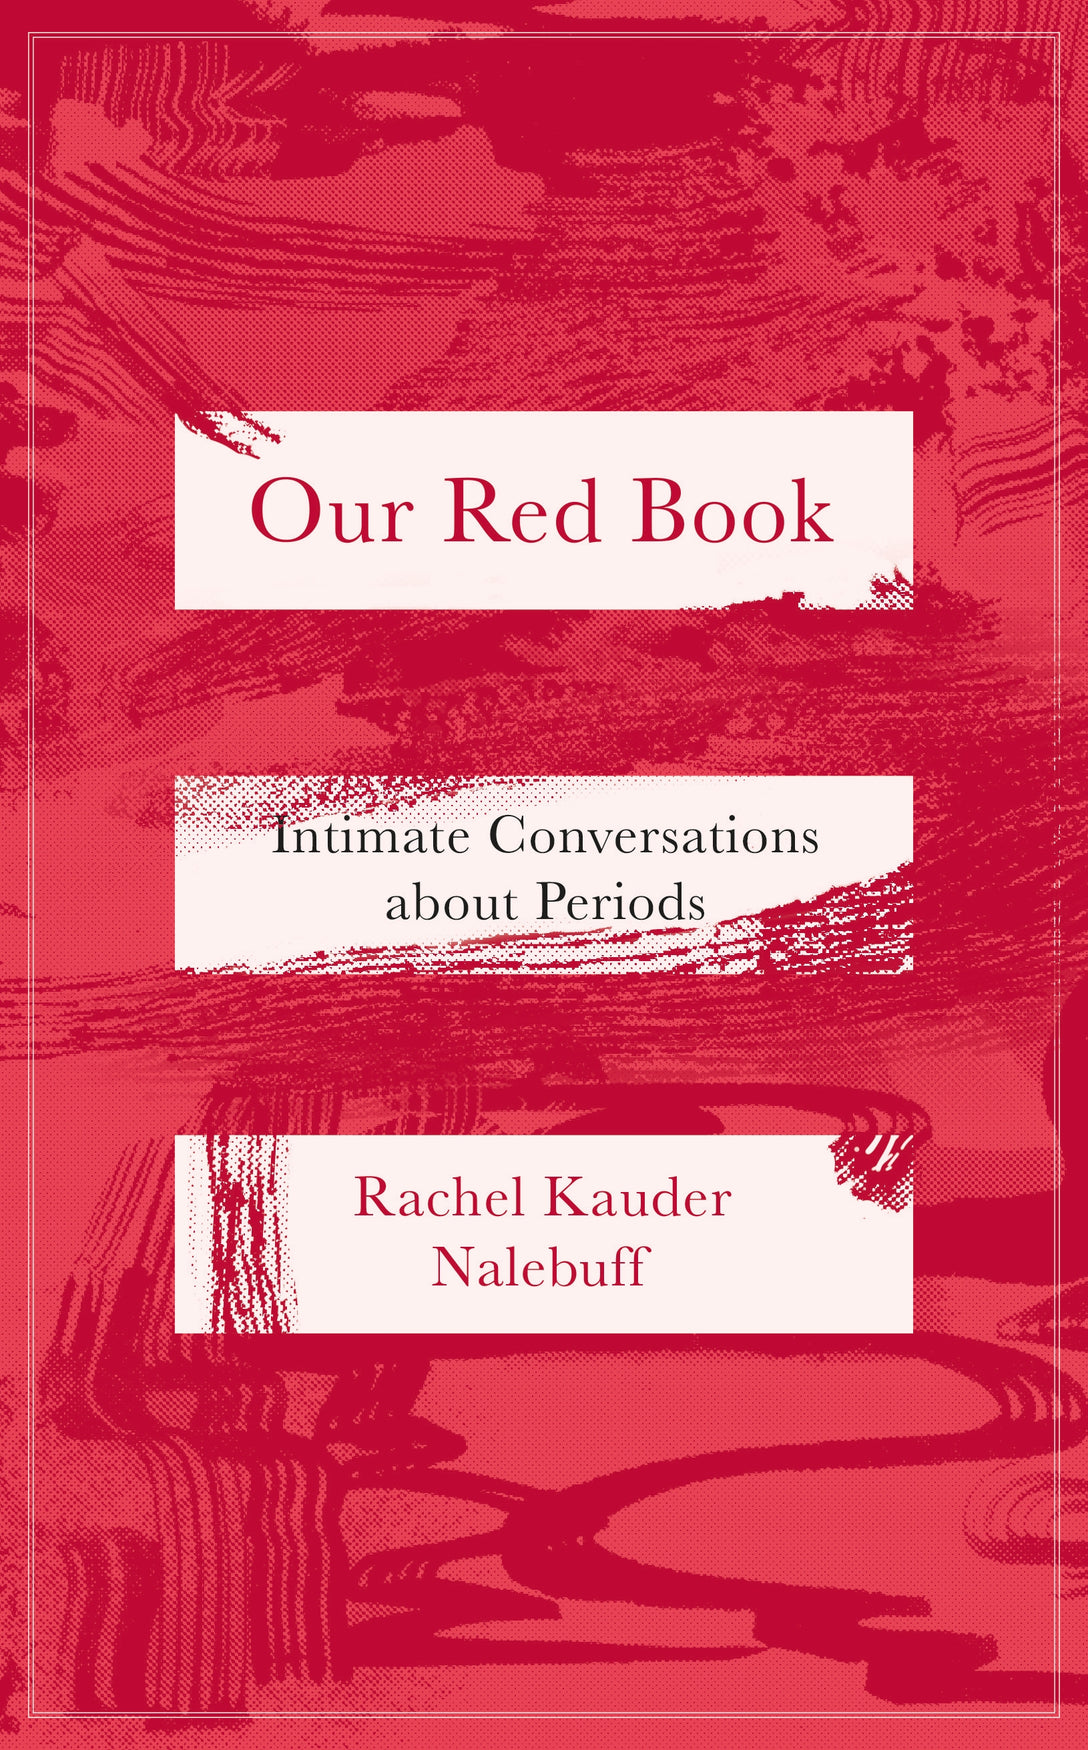 Our Red Book by Rachel Kauder Nalebuff